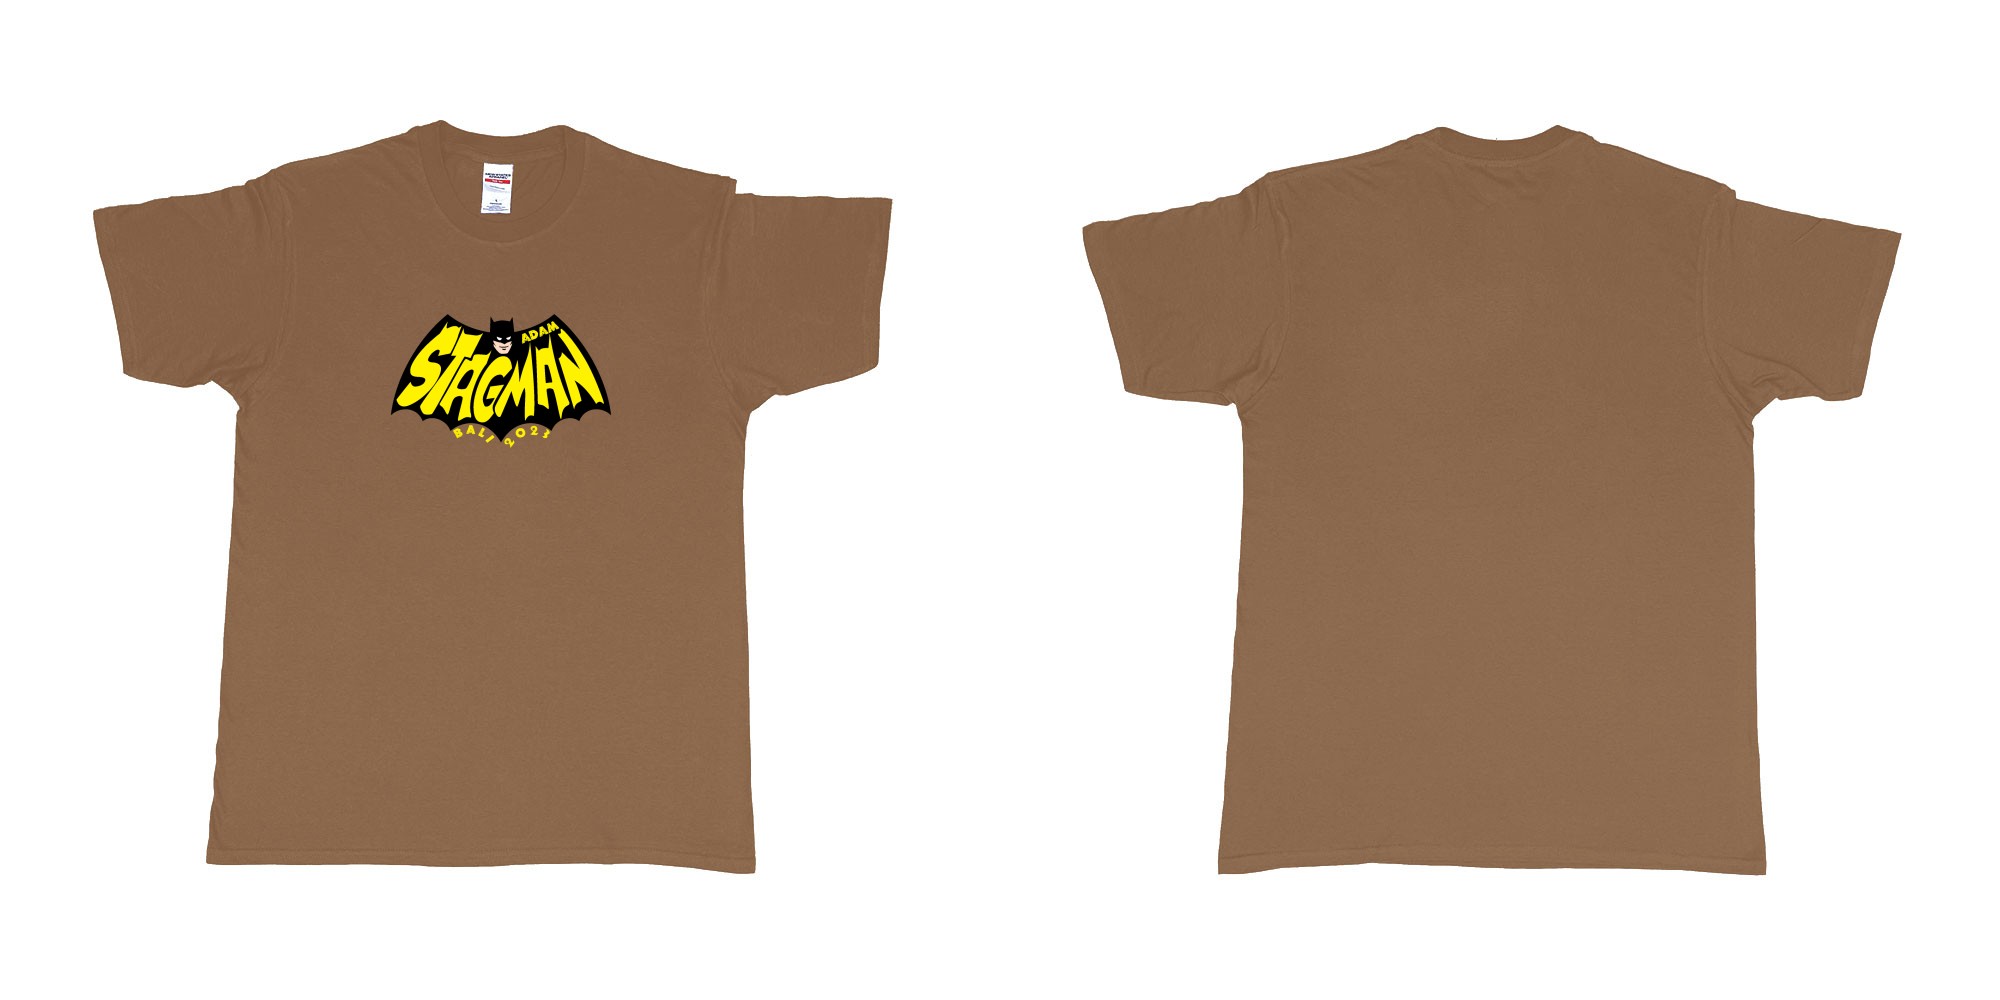 Custom tshirt design Batman StagMan Old School in fabric color chestnut choice your own text made in Bali by The Pirate Way